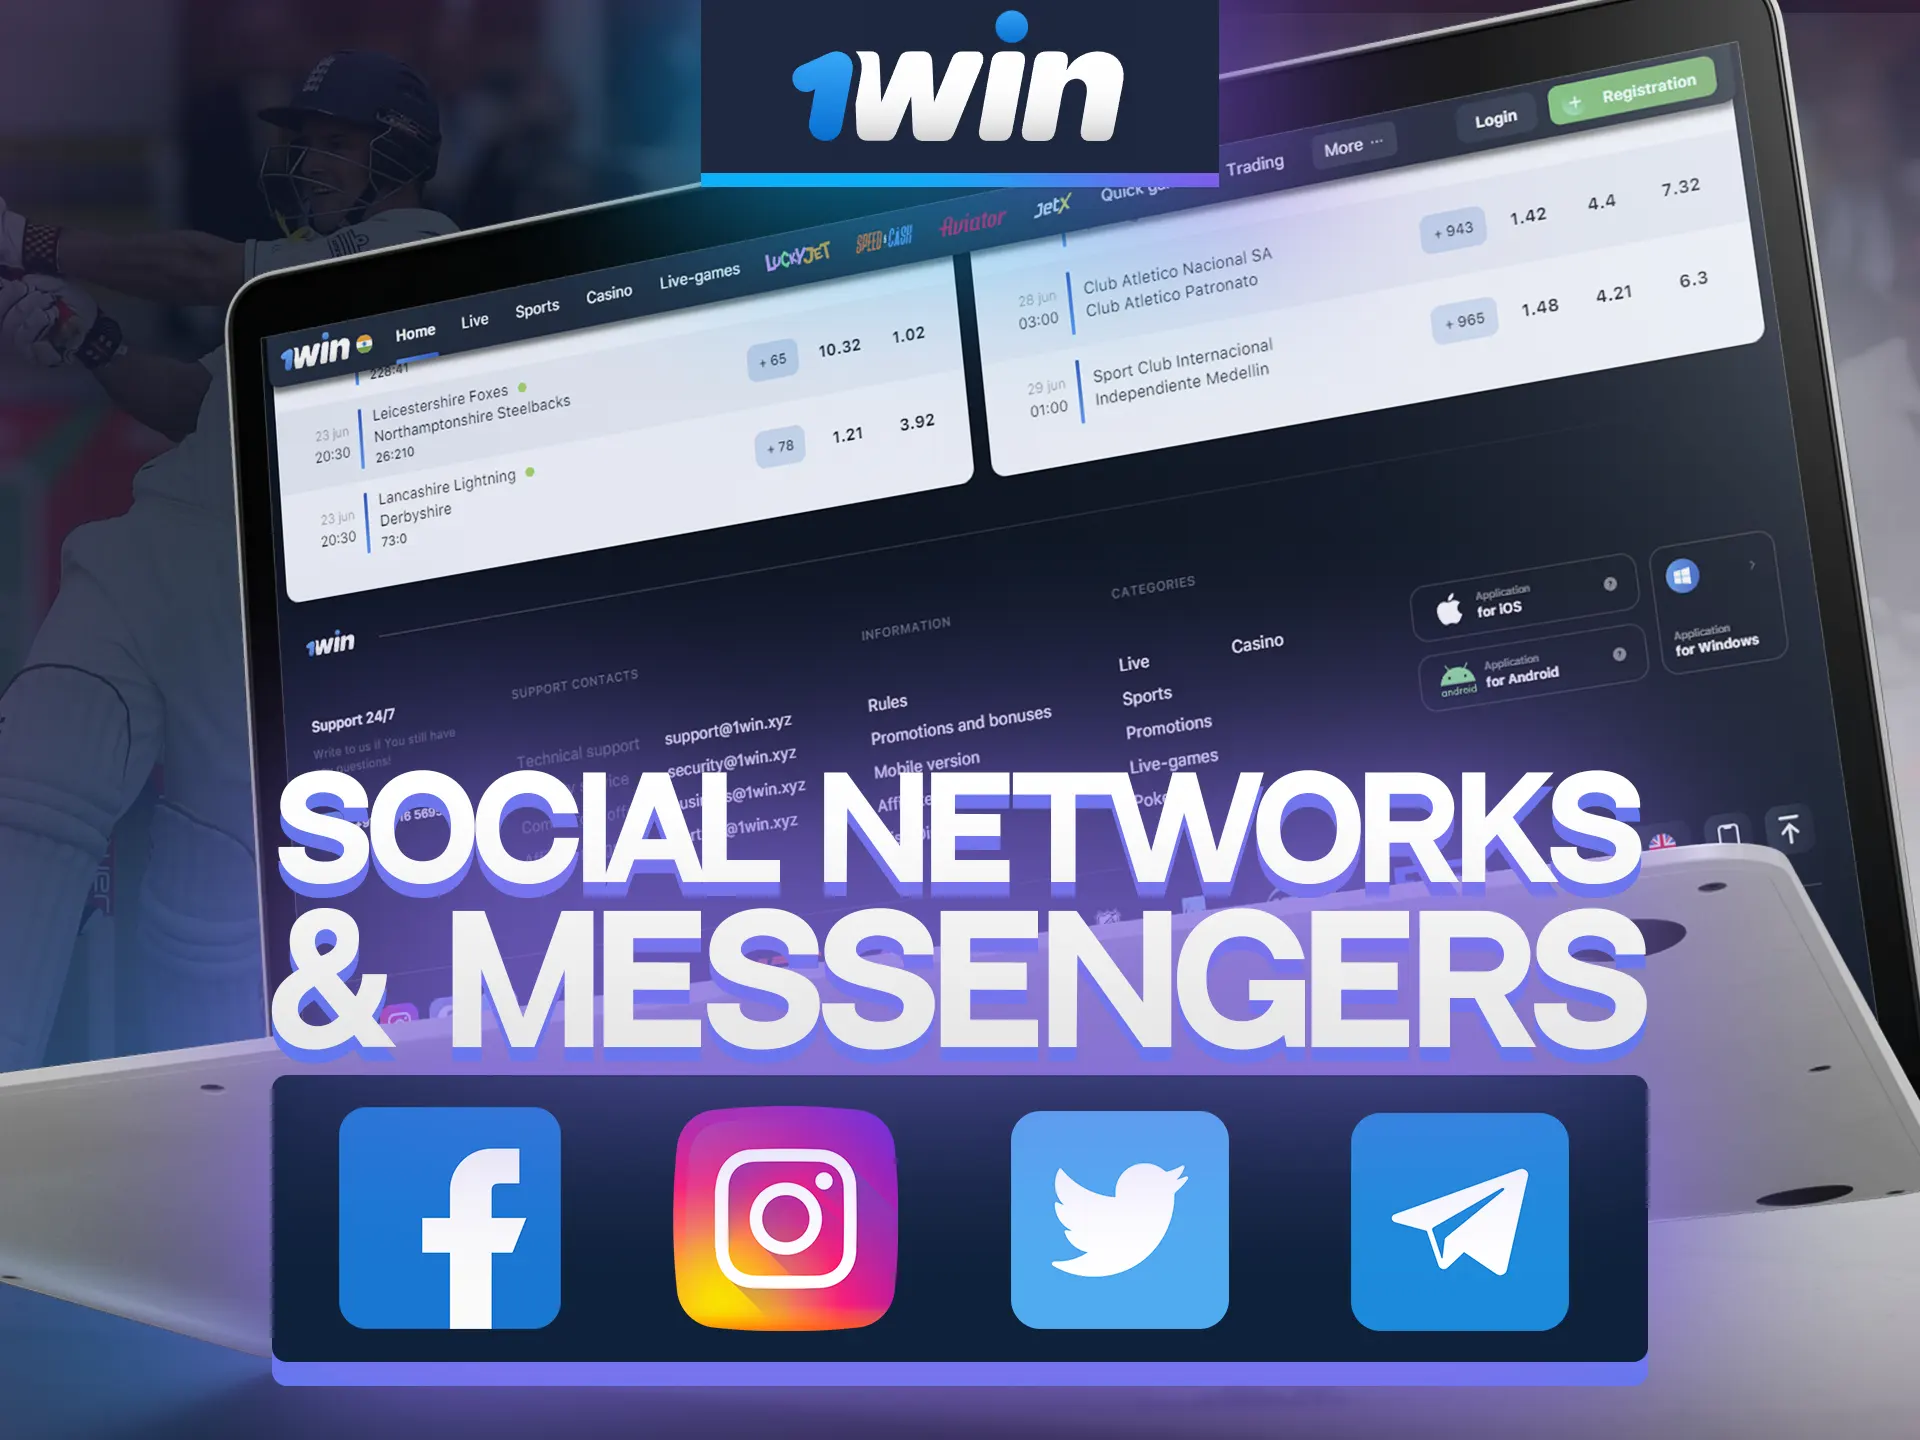 Contact 1Win support via social networks and messengers.